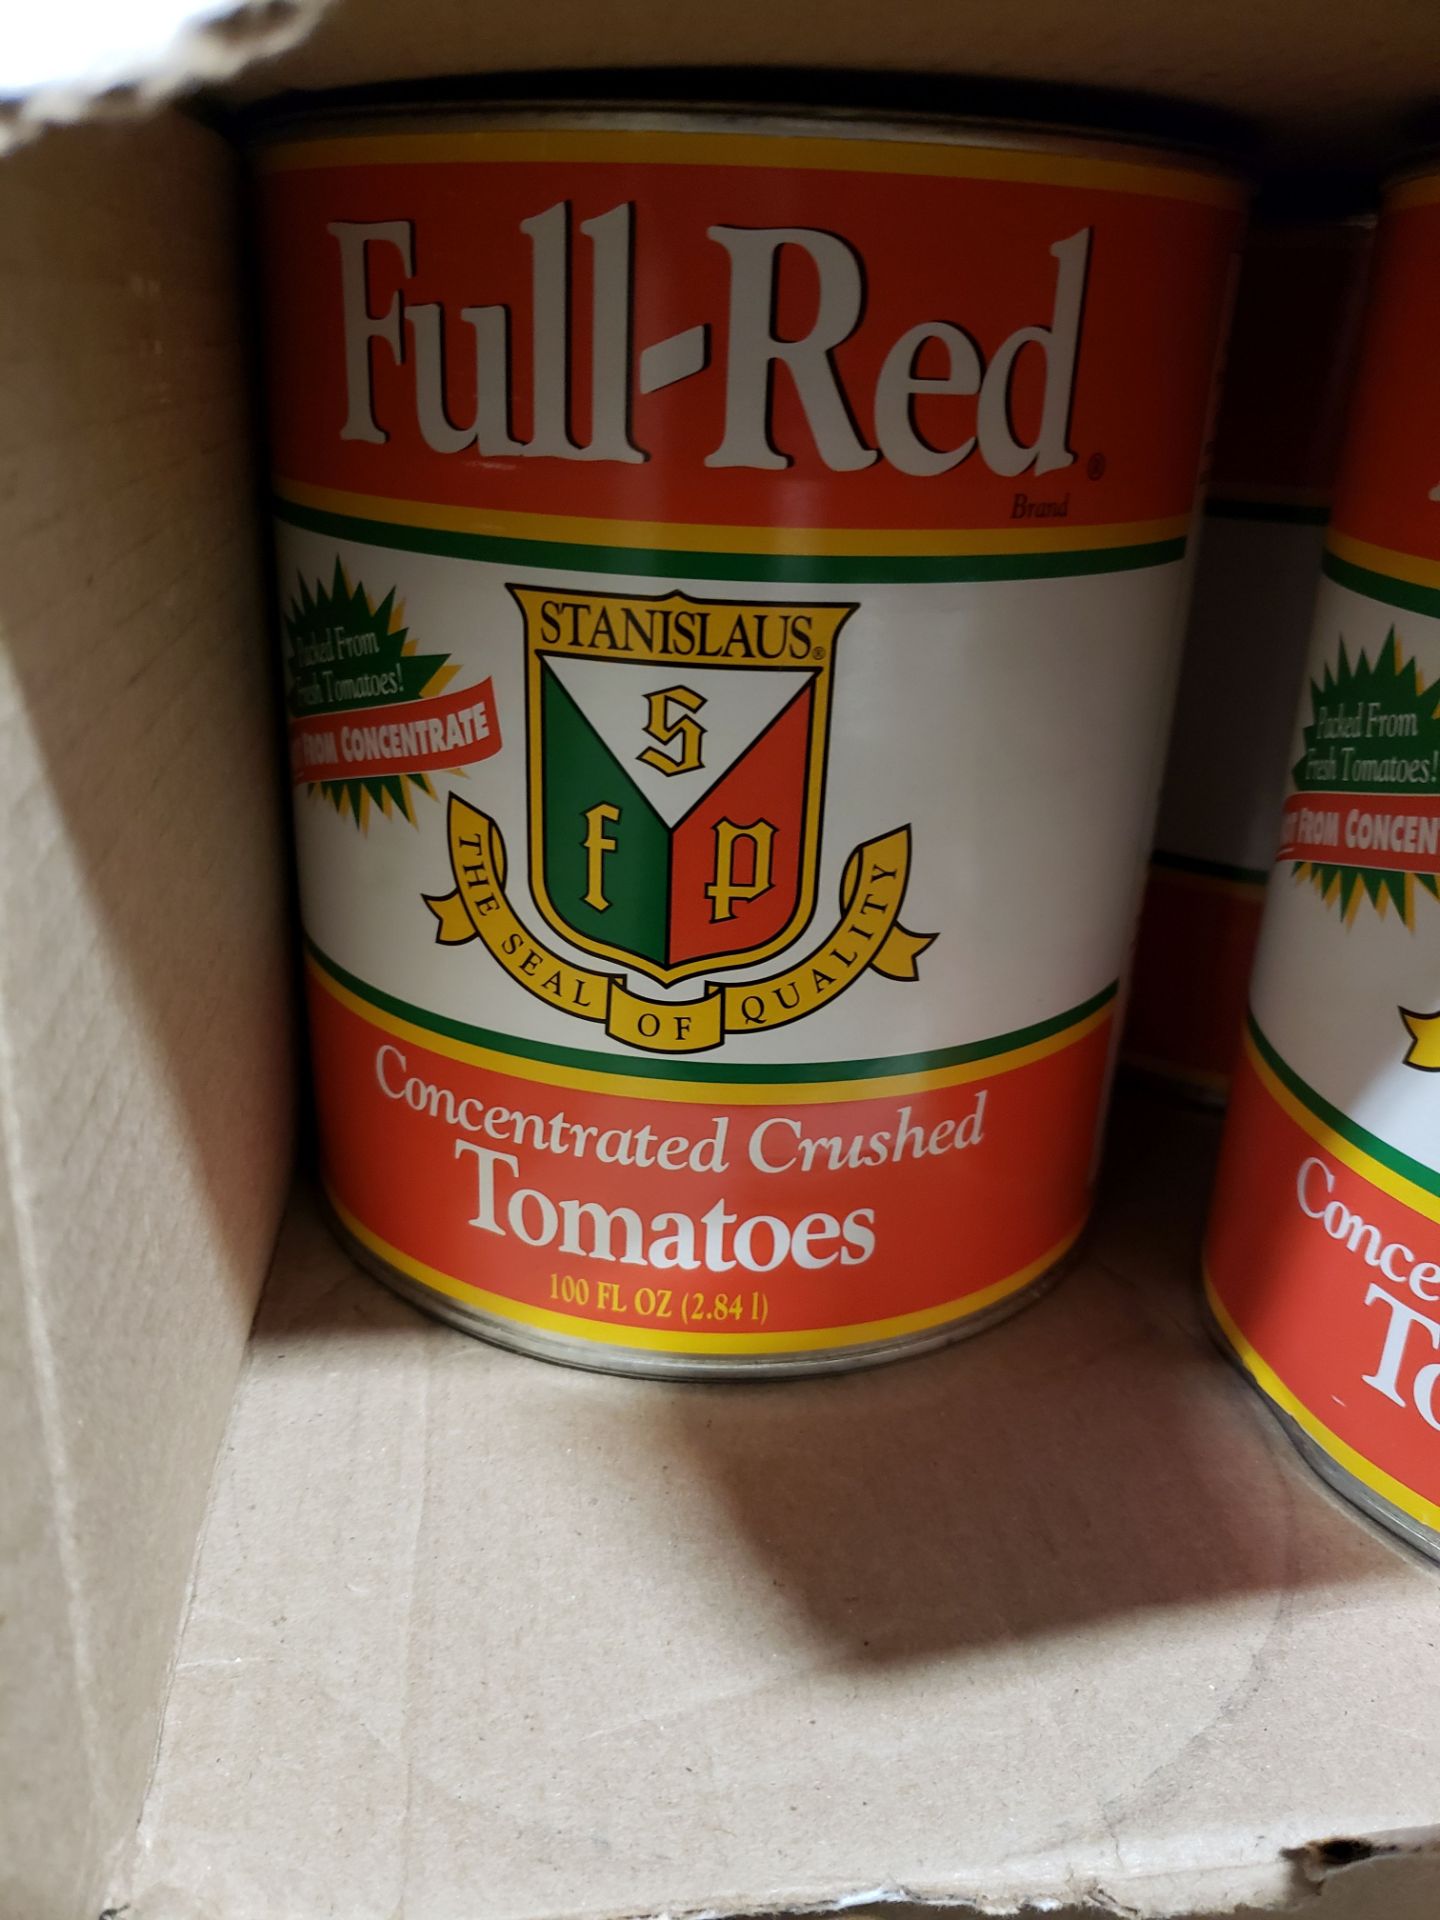 Full-Red Concentrated Crushed Tomatoes - 5 x 2.84lt Cans